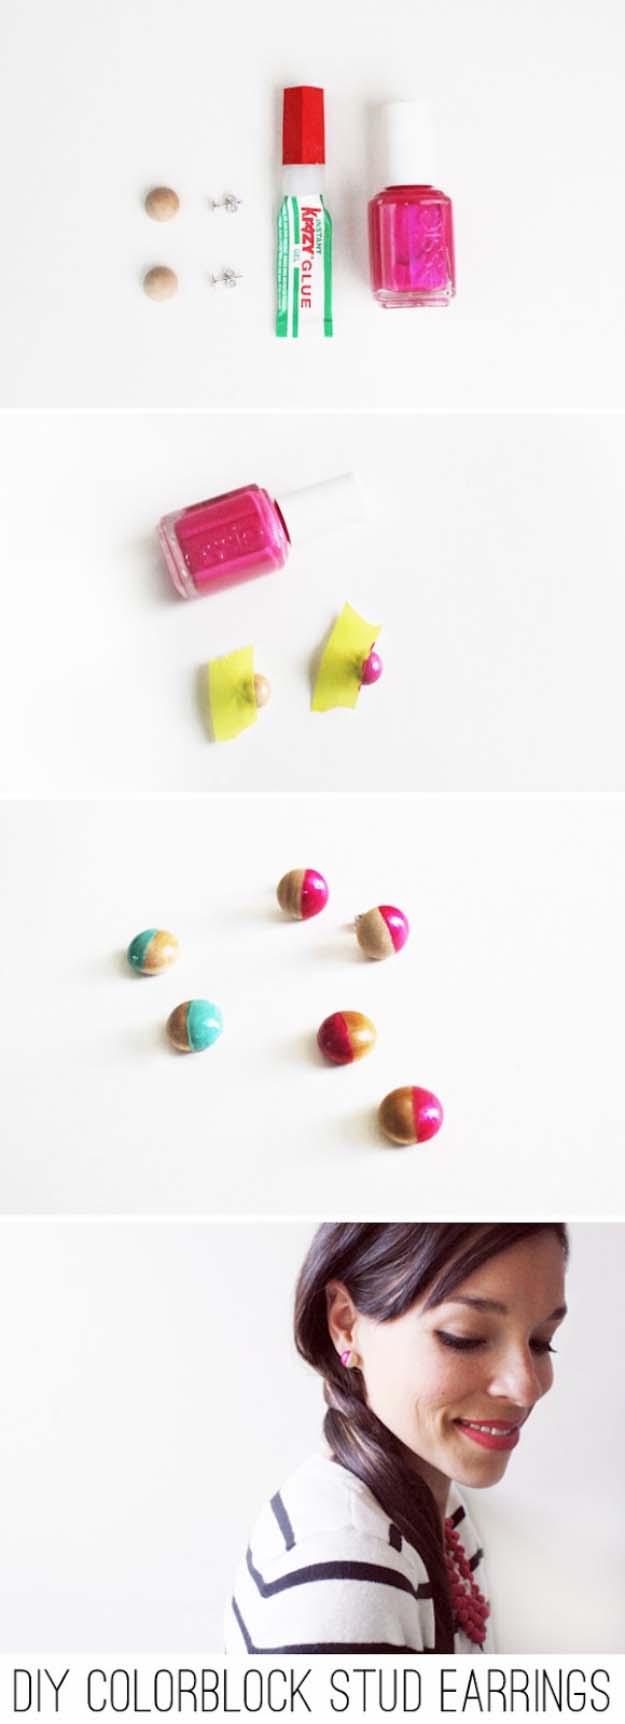 DIY Crafts Using Nail Polish - Fun, Cool, Easy and Cheap Craft Ideas for Girls, Teens, Tweens and Adults | Kate Spade Inspired Colorblock Stud Earrings